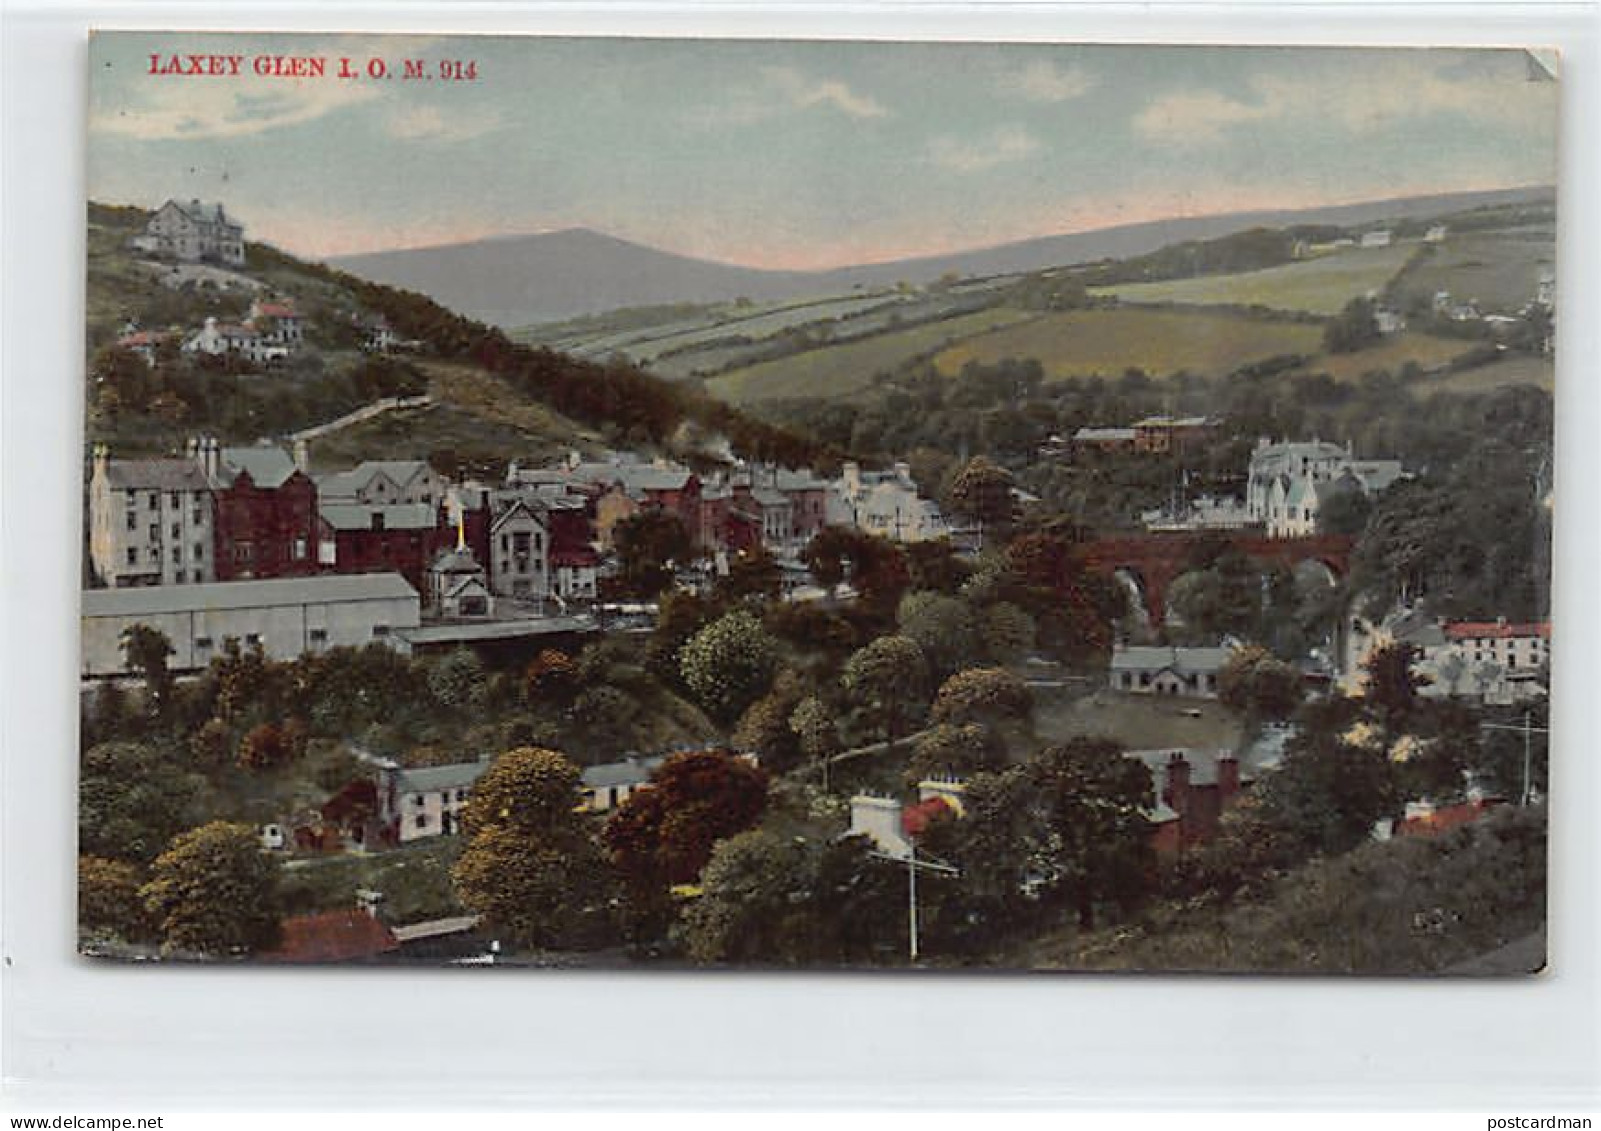 Isle Of Man - Laxey Glen - Publ. W. A. & S. 914 - Isle Of Man